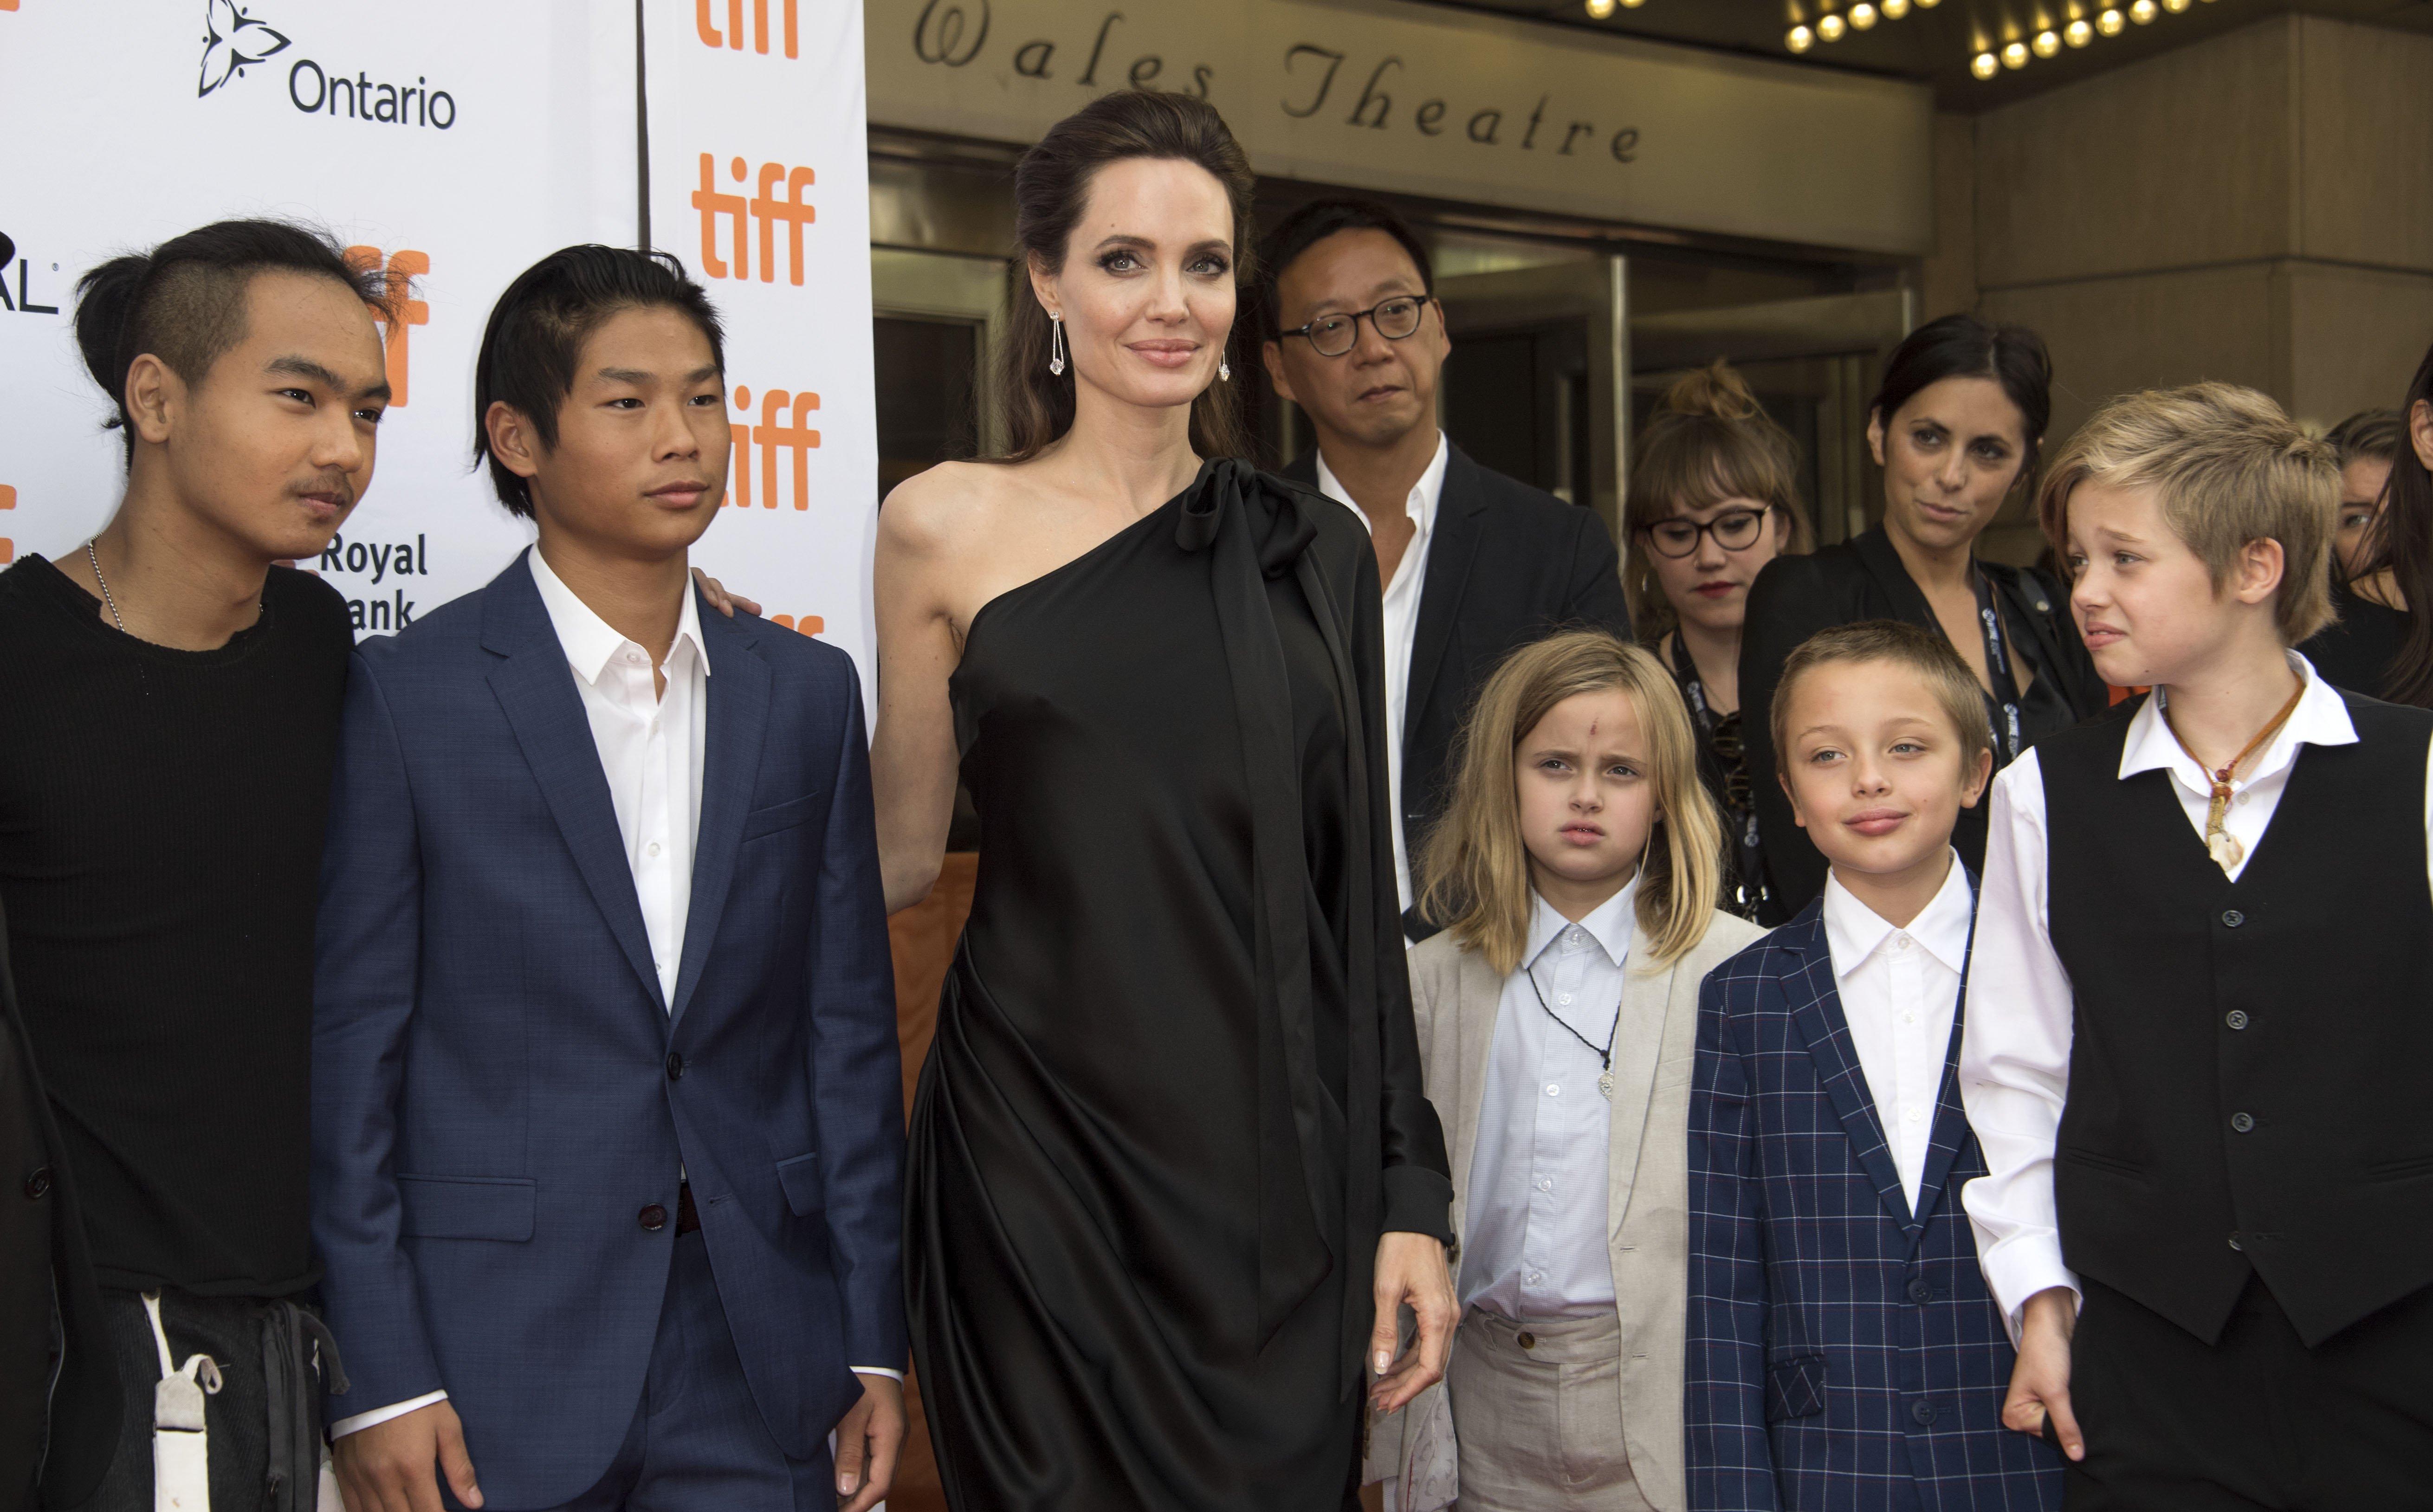 Maddox Chivan Jolie-Pitt, Pax Thien Jolie-Pitt, Angelina Jolie, Vivienne Marcheline Jolie-Pitt, Knox Leon Jolie-Pitt, and Shiloh Nouvel Jolie-Pitt at the premiere of "First they Killed my Father" at the Toronto International Film Festival in Ontario on September 11, 2017 | Source: Getty Images